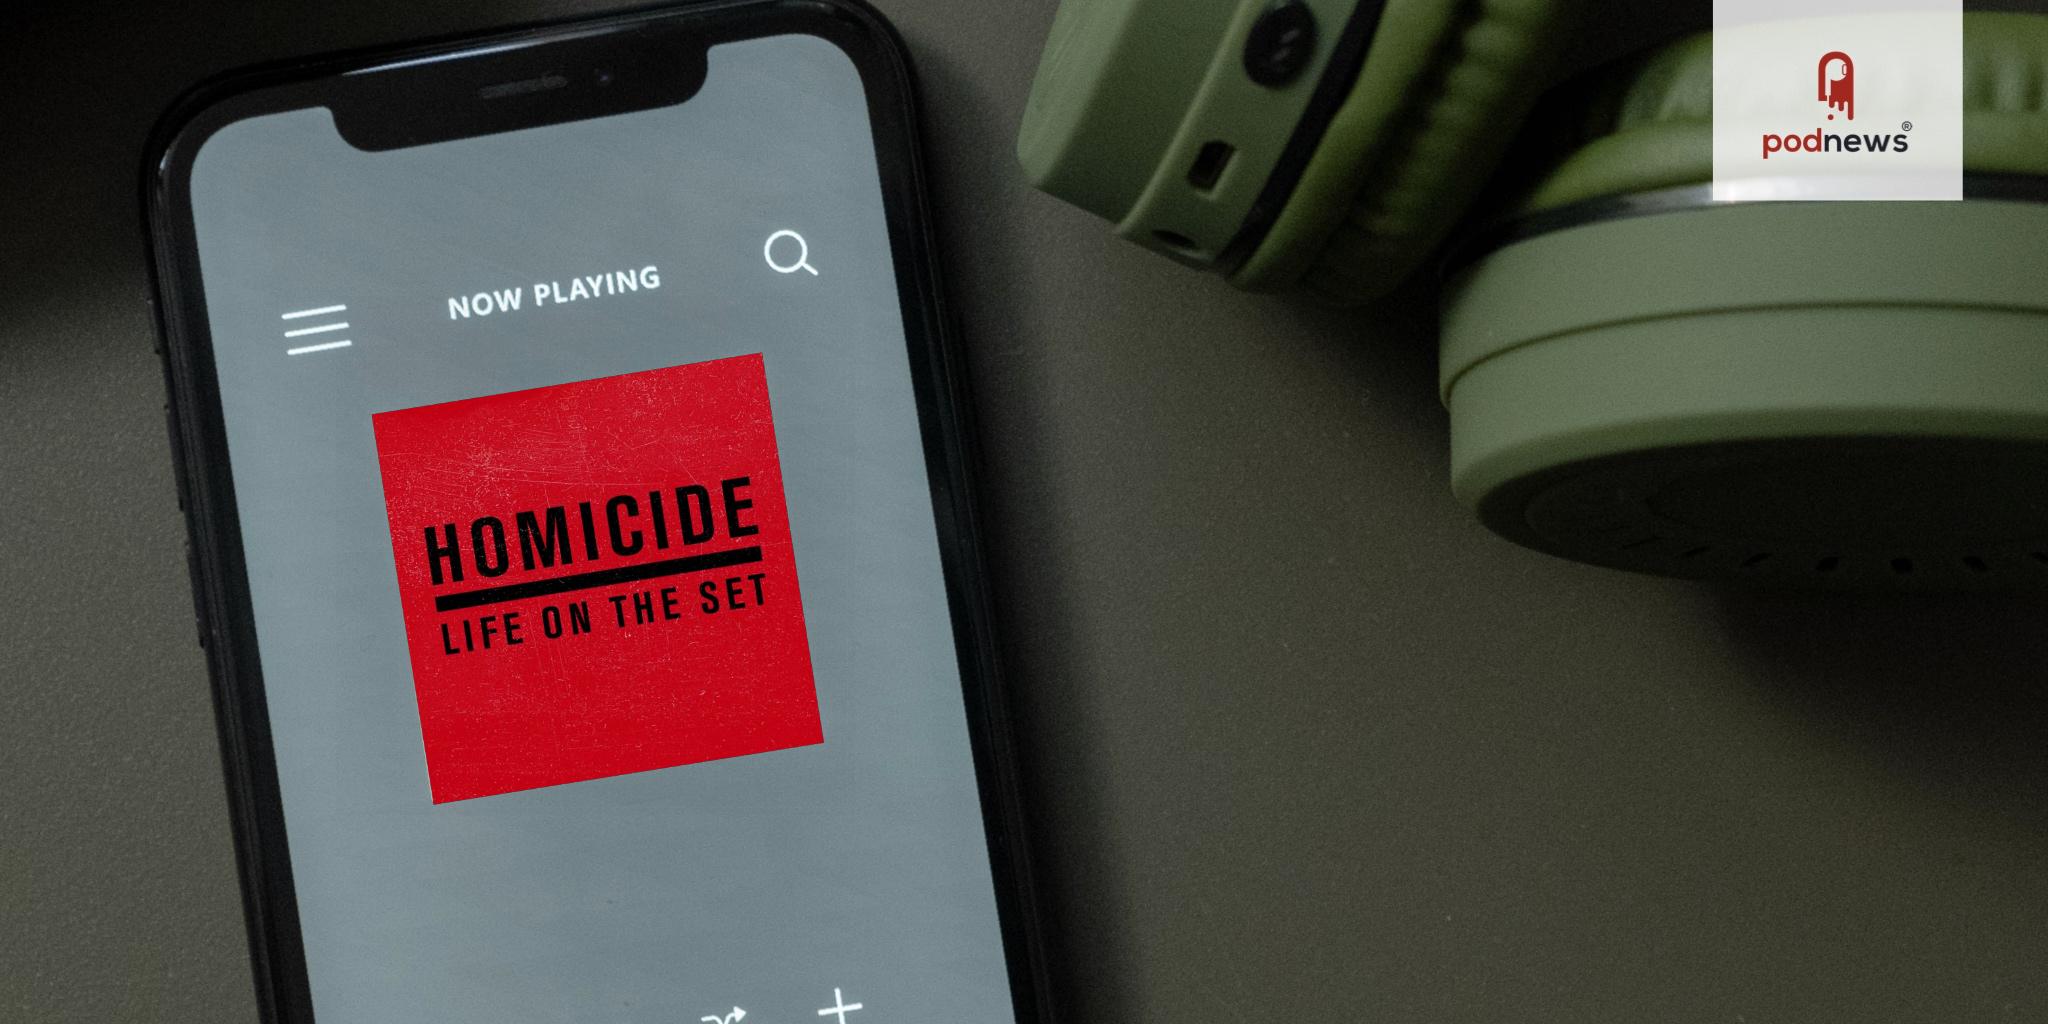 ‘Homicide: Life on the Set’ Podcast to Premiere on March 7